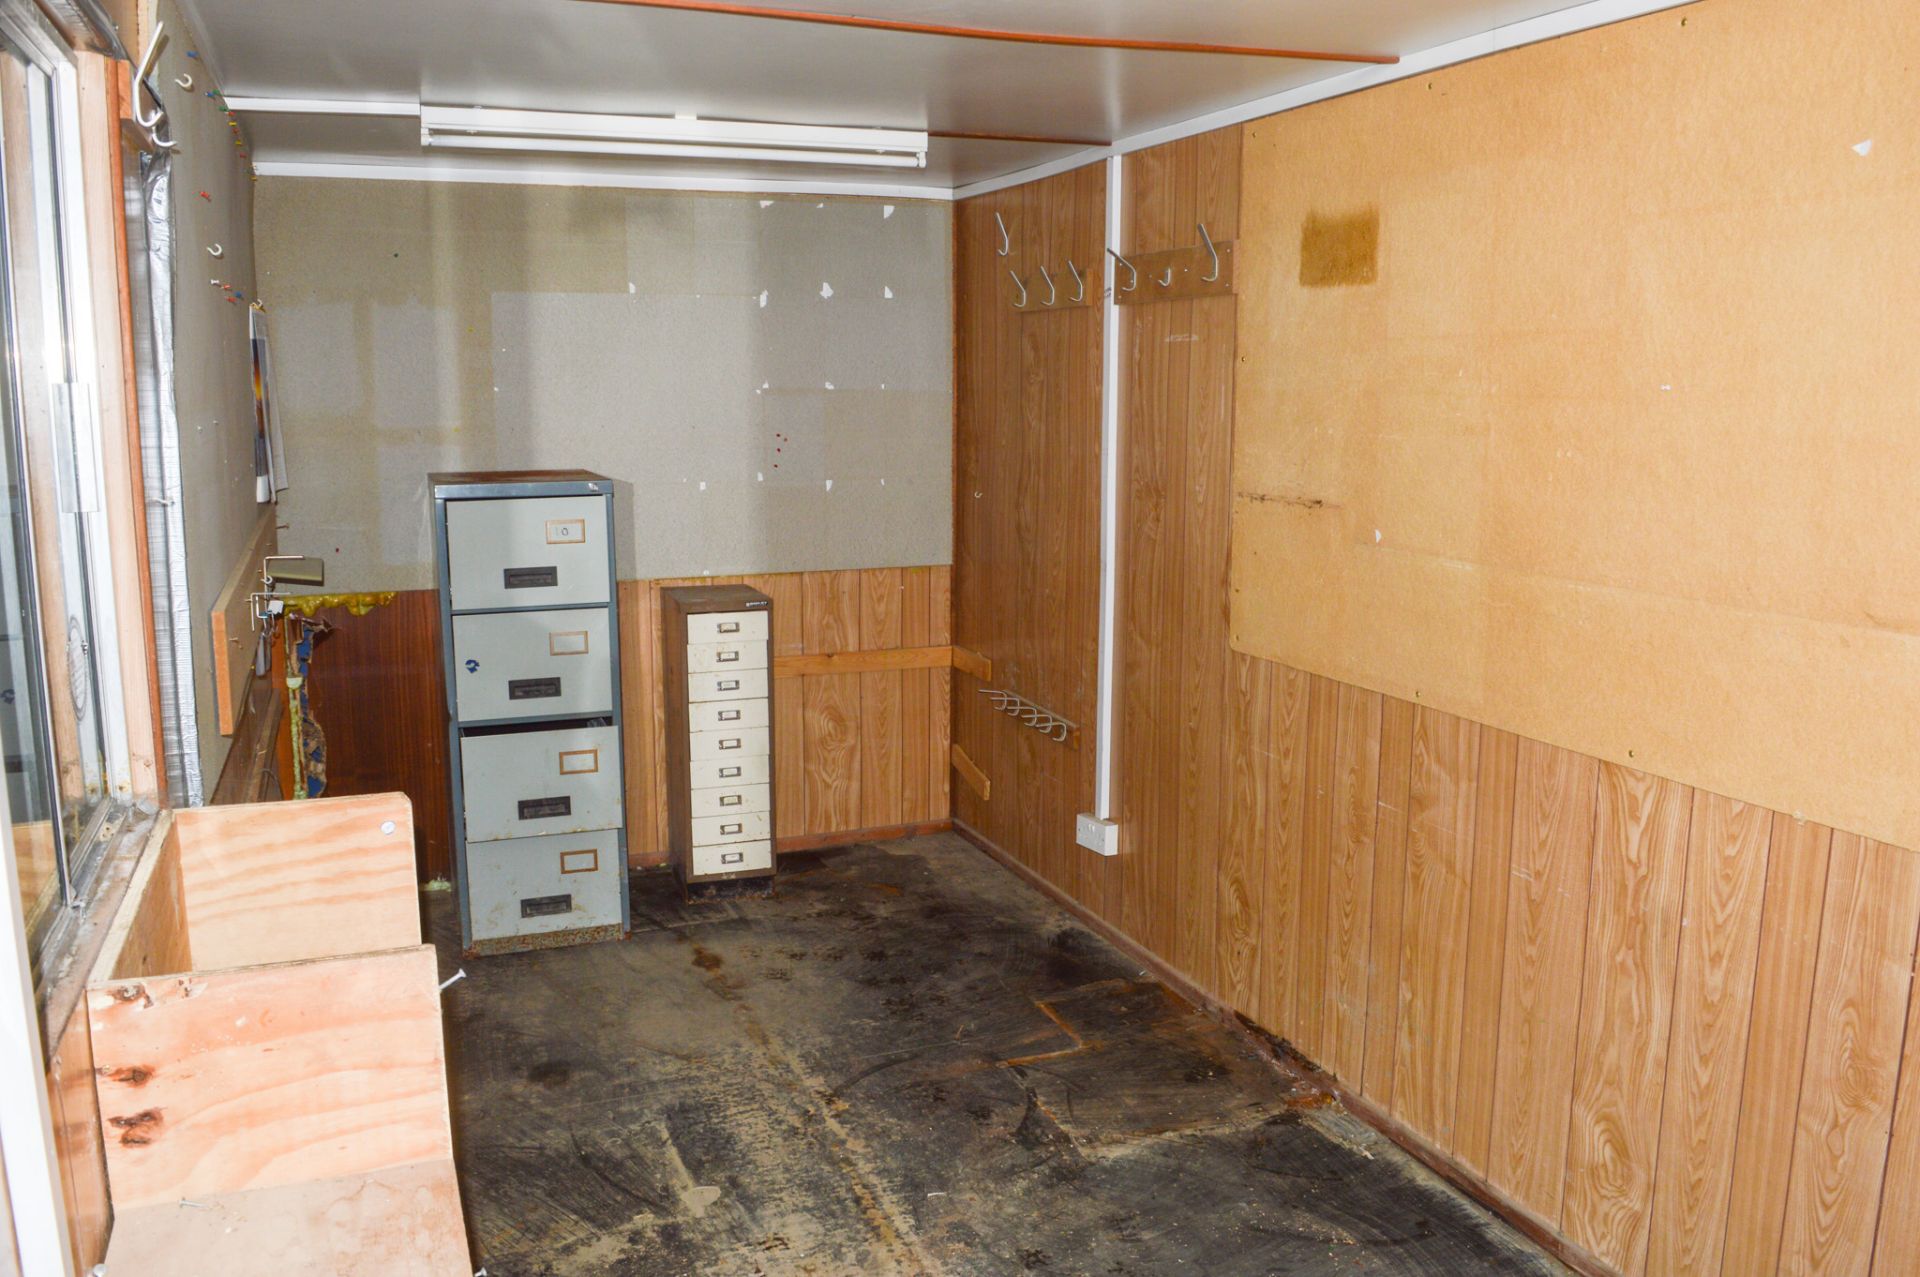 20 ft x 8 ft steel office site unit (converted shipping container) c/w keys in office (Site Office - Image 5 of 6